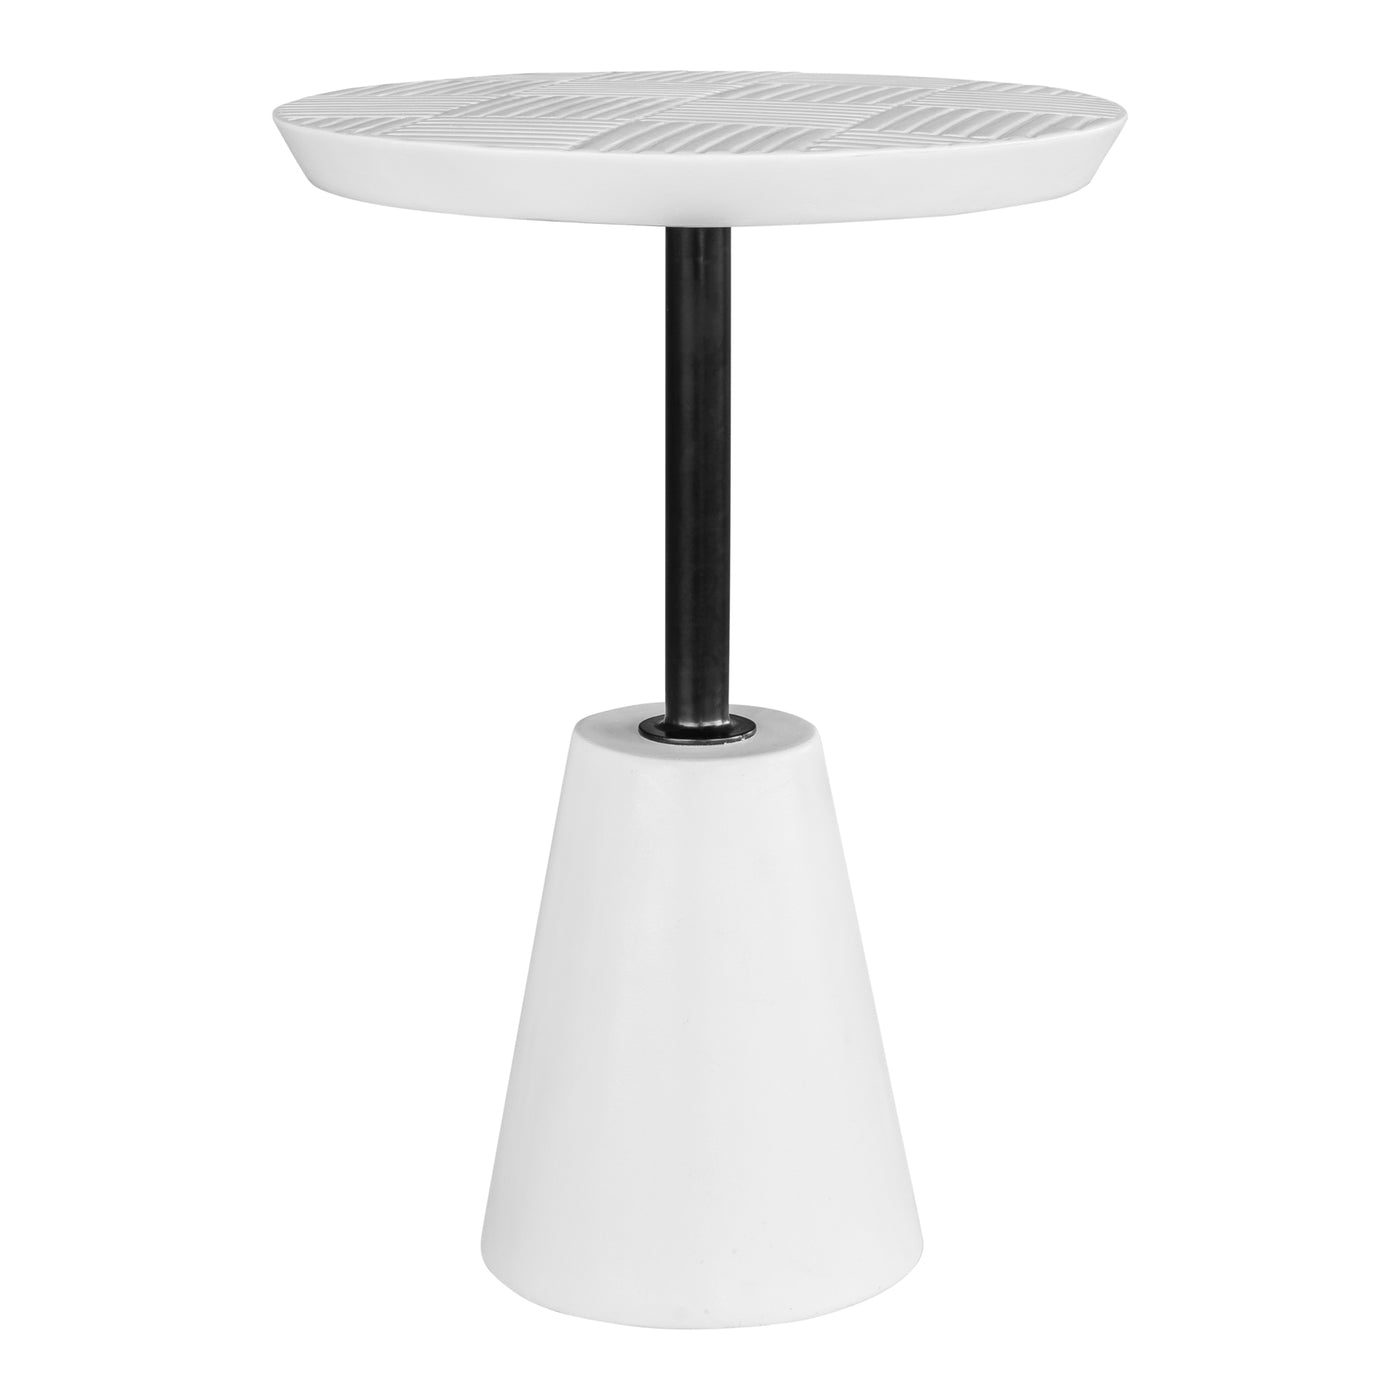 The Foundation Outdoor Accent Table is a building block for creating the sleekest outdoor patio experience yet. A round, t...